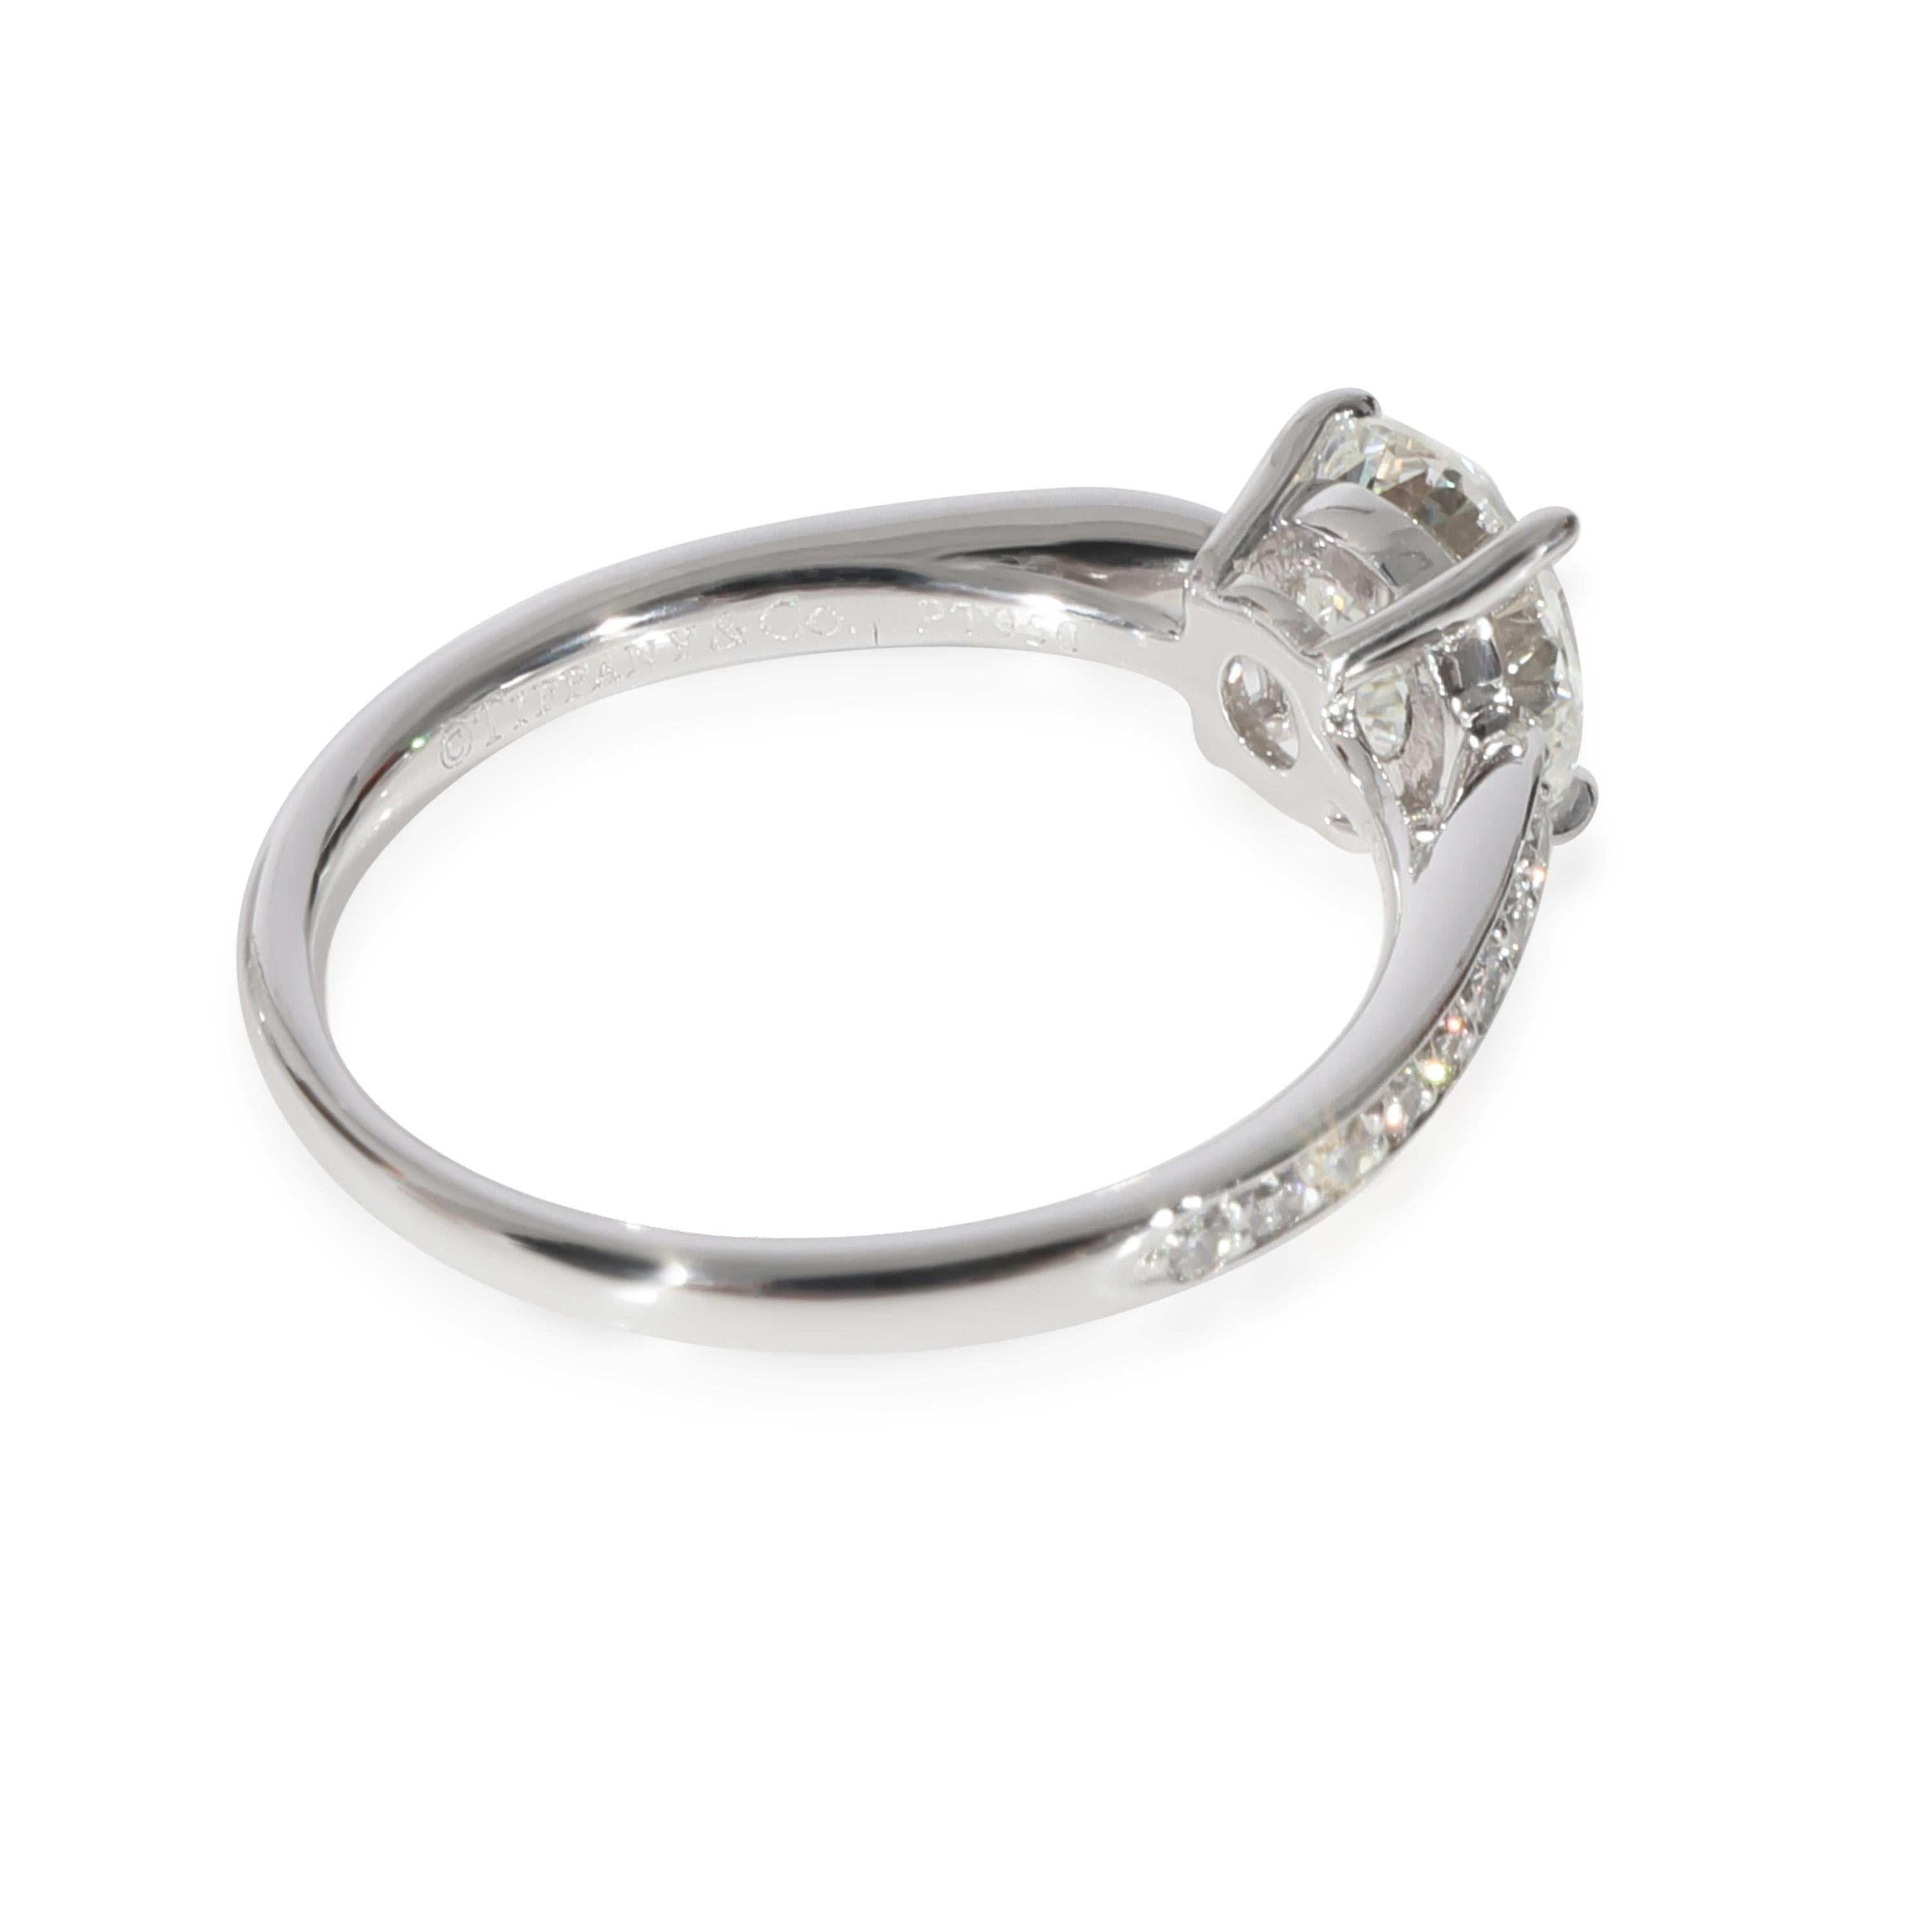 Tiffany & Co. Harmony Diamond Engagement Ring in Platinum I VVS2 1.38 CTW

PRIMARY DETAILS
SKU: 128691
Listing Title: Tiffany & Co. Harmony Diamond Engagement Ring in Platinum I VVS2 1.38 CTW
Condition Description: Retails for 19600 USD. In